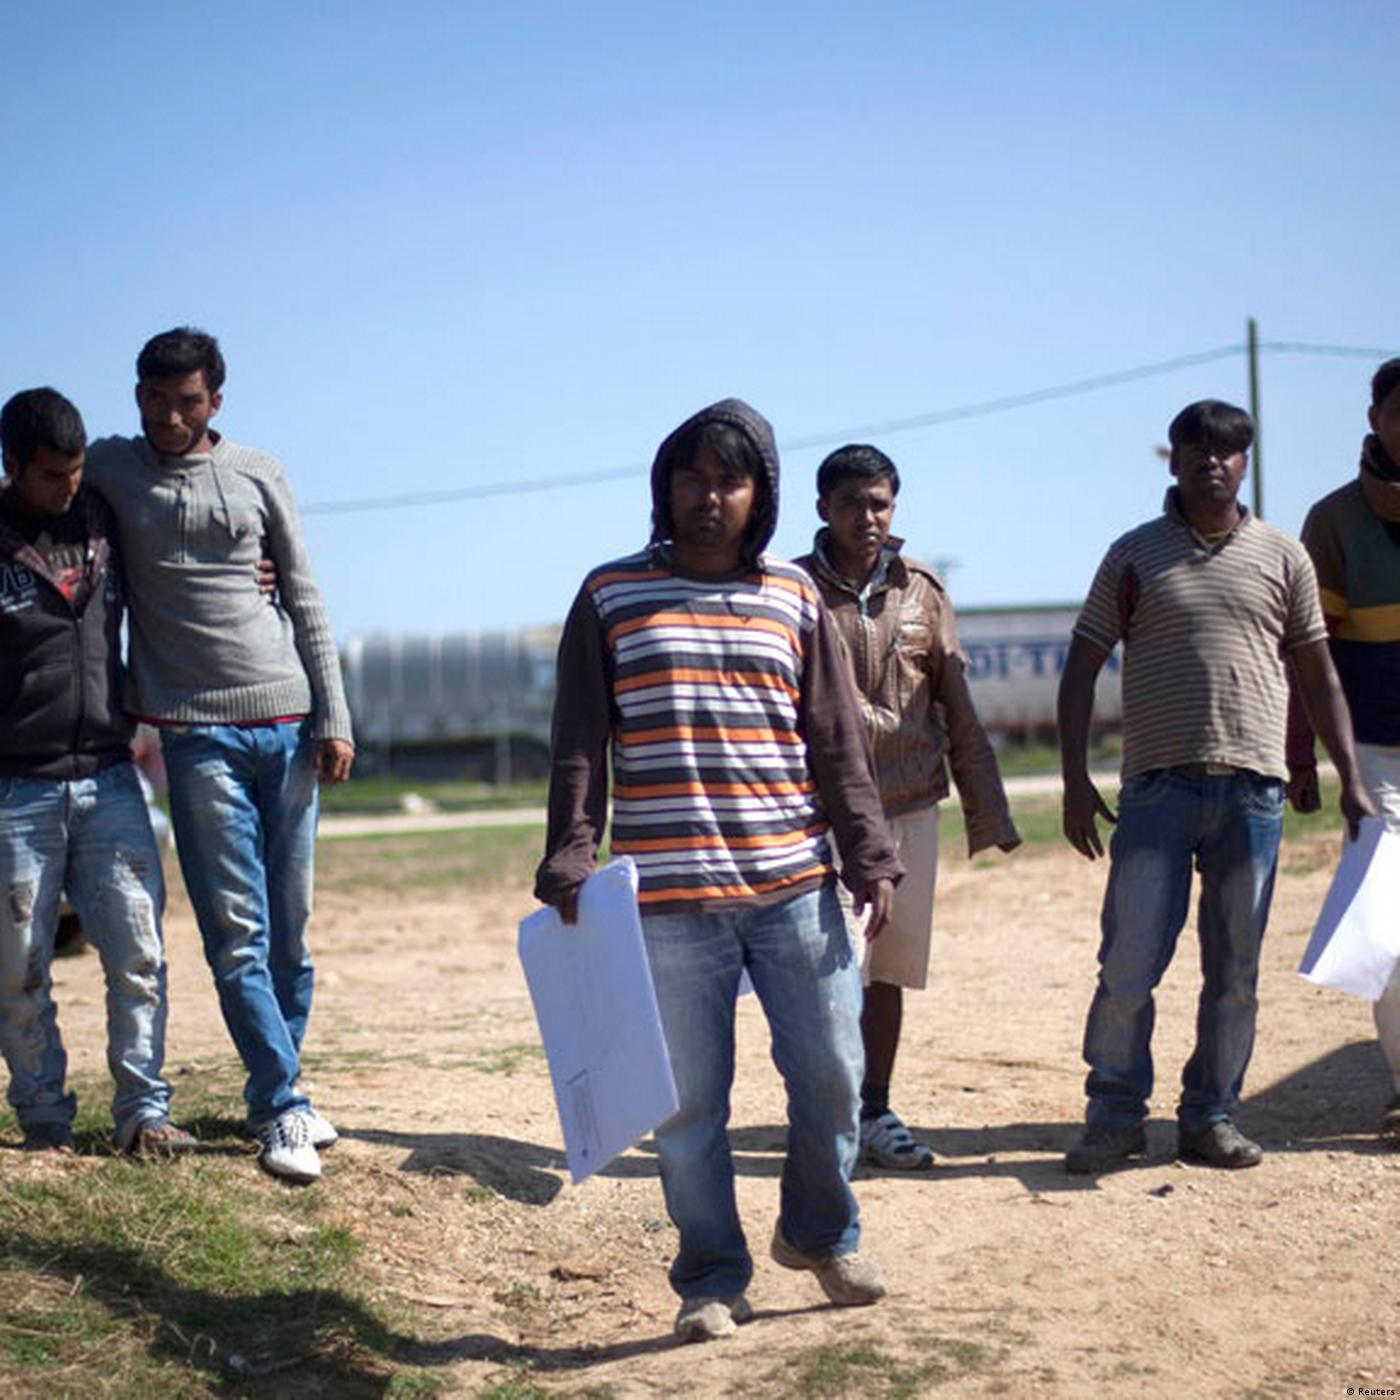 Greece: The misery of migrant workers